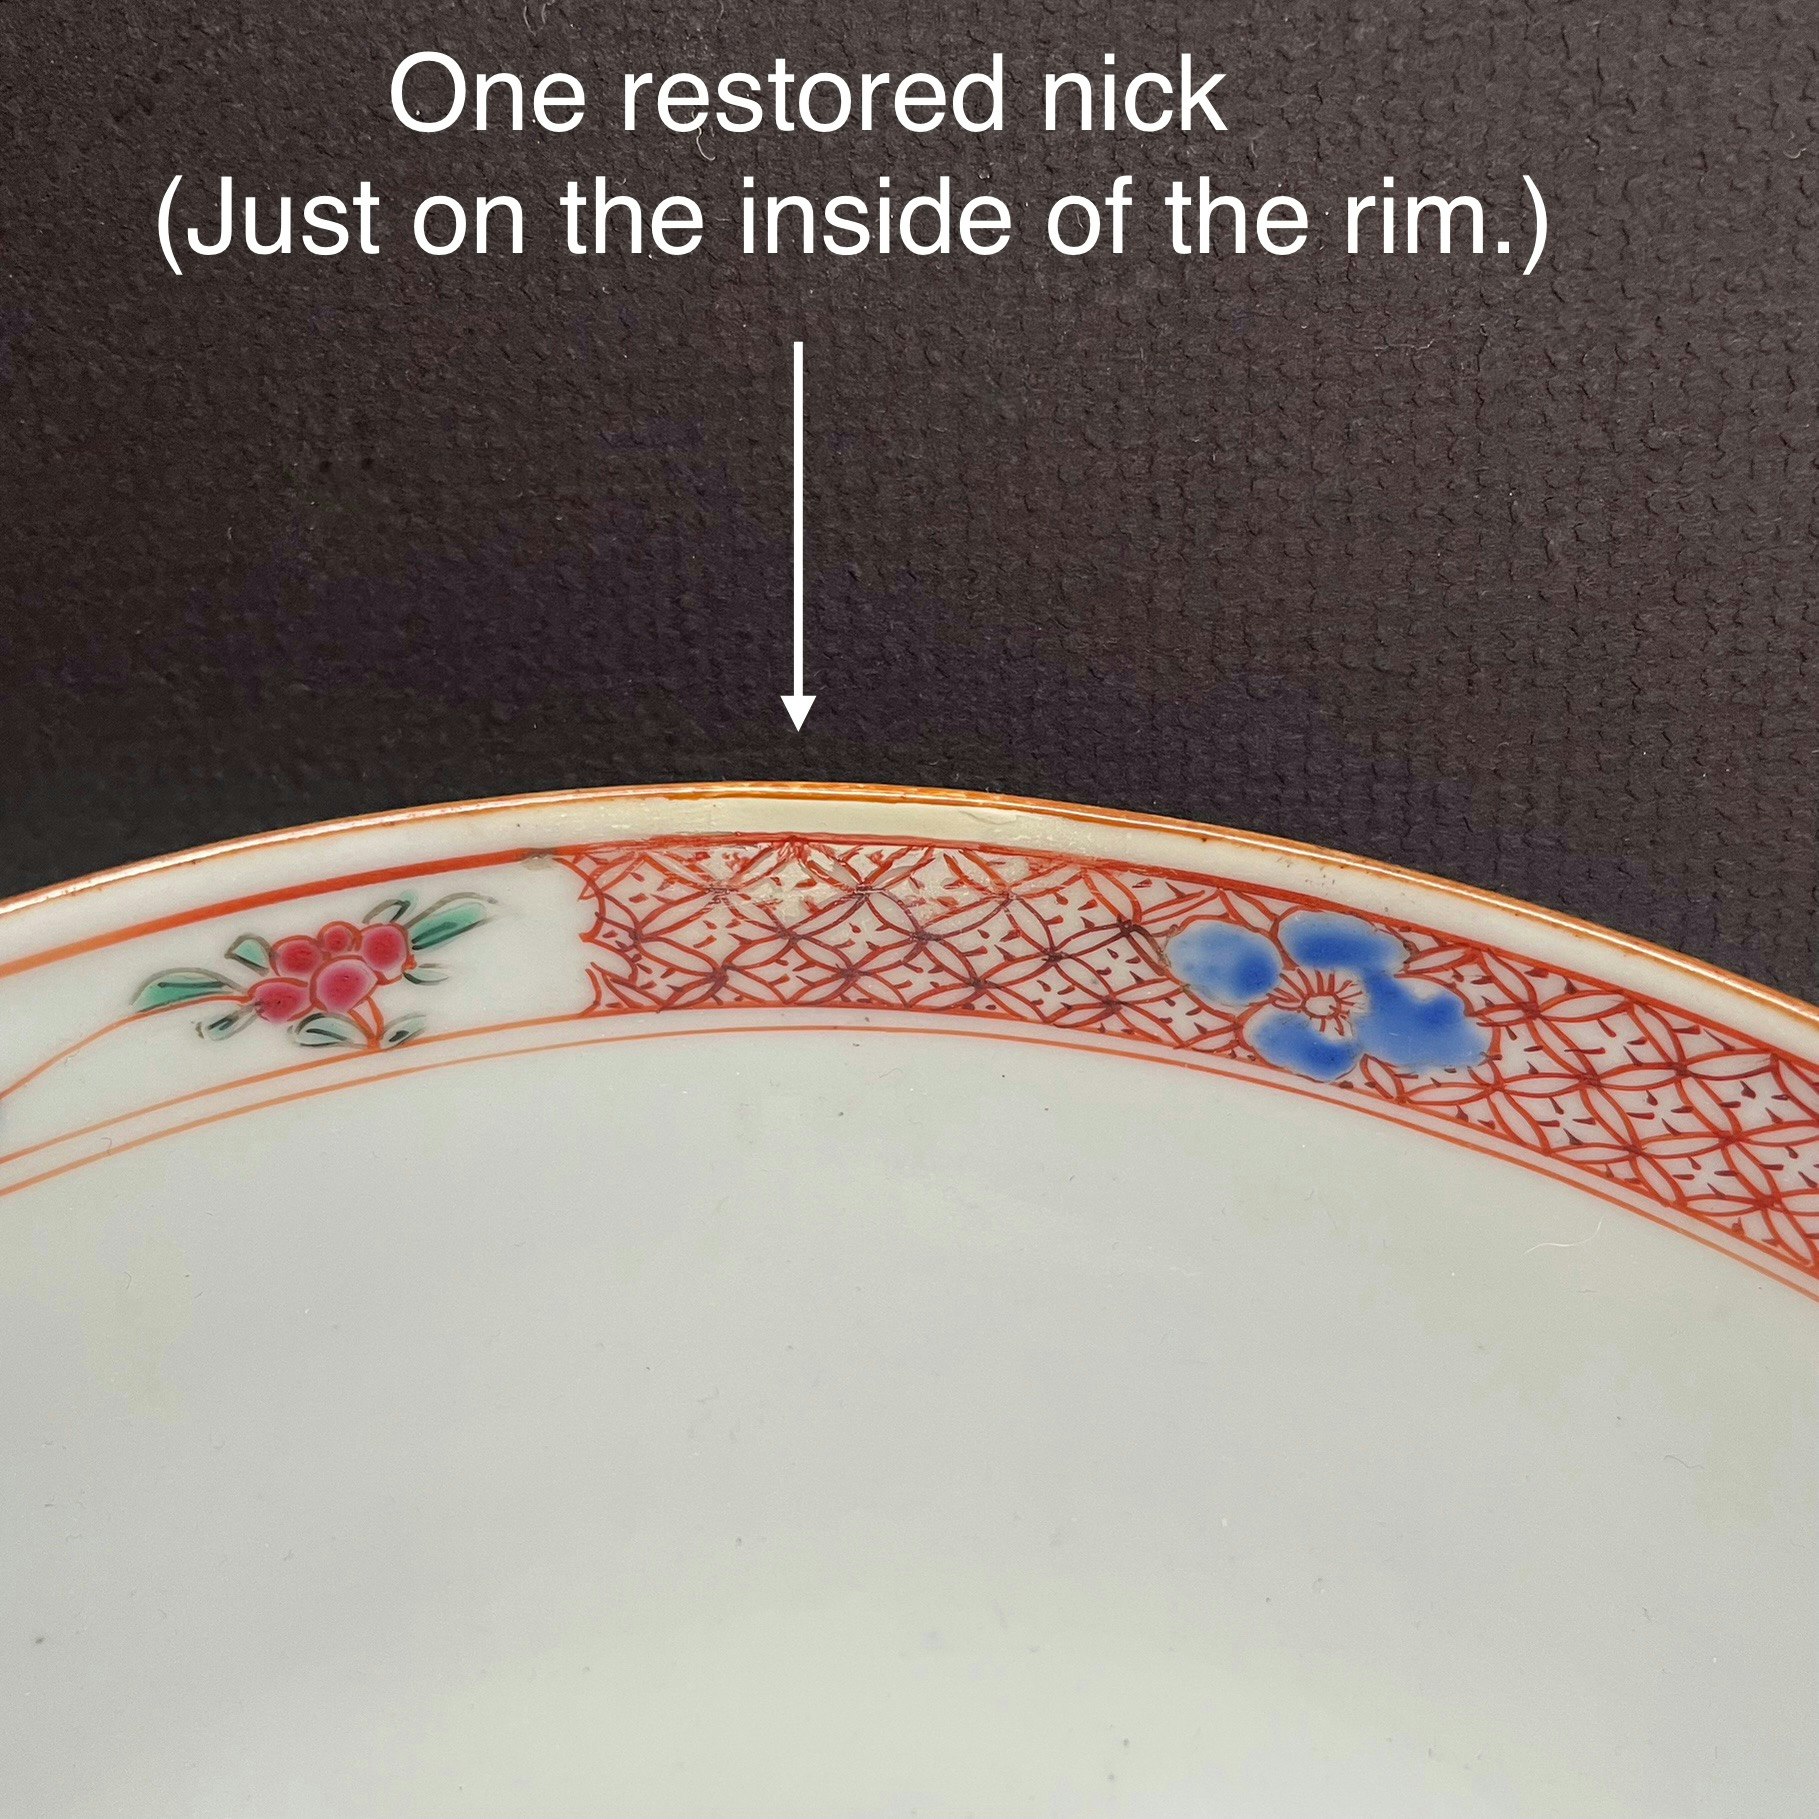 Large Chinese Antique Famille Rose bowl, Qianlong, 18th century #1759